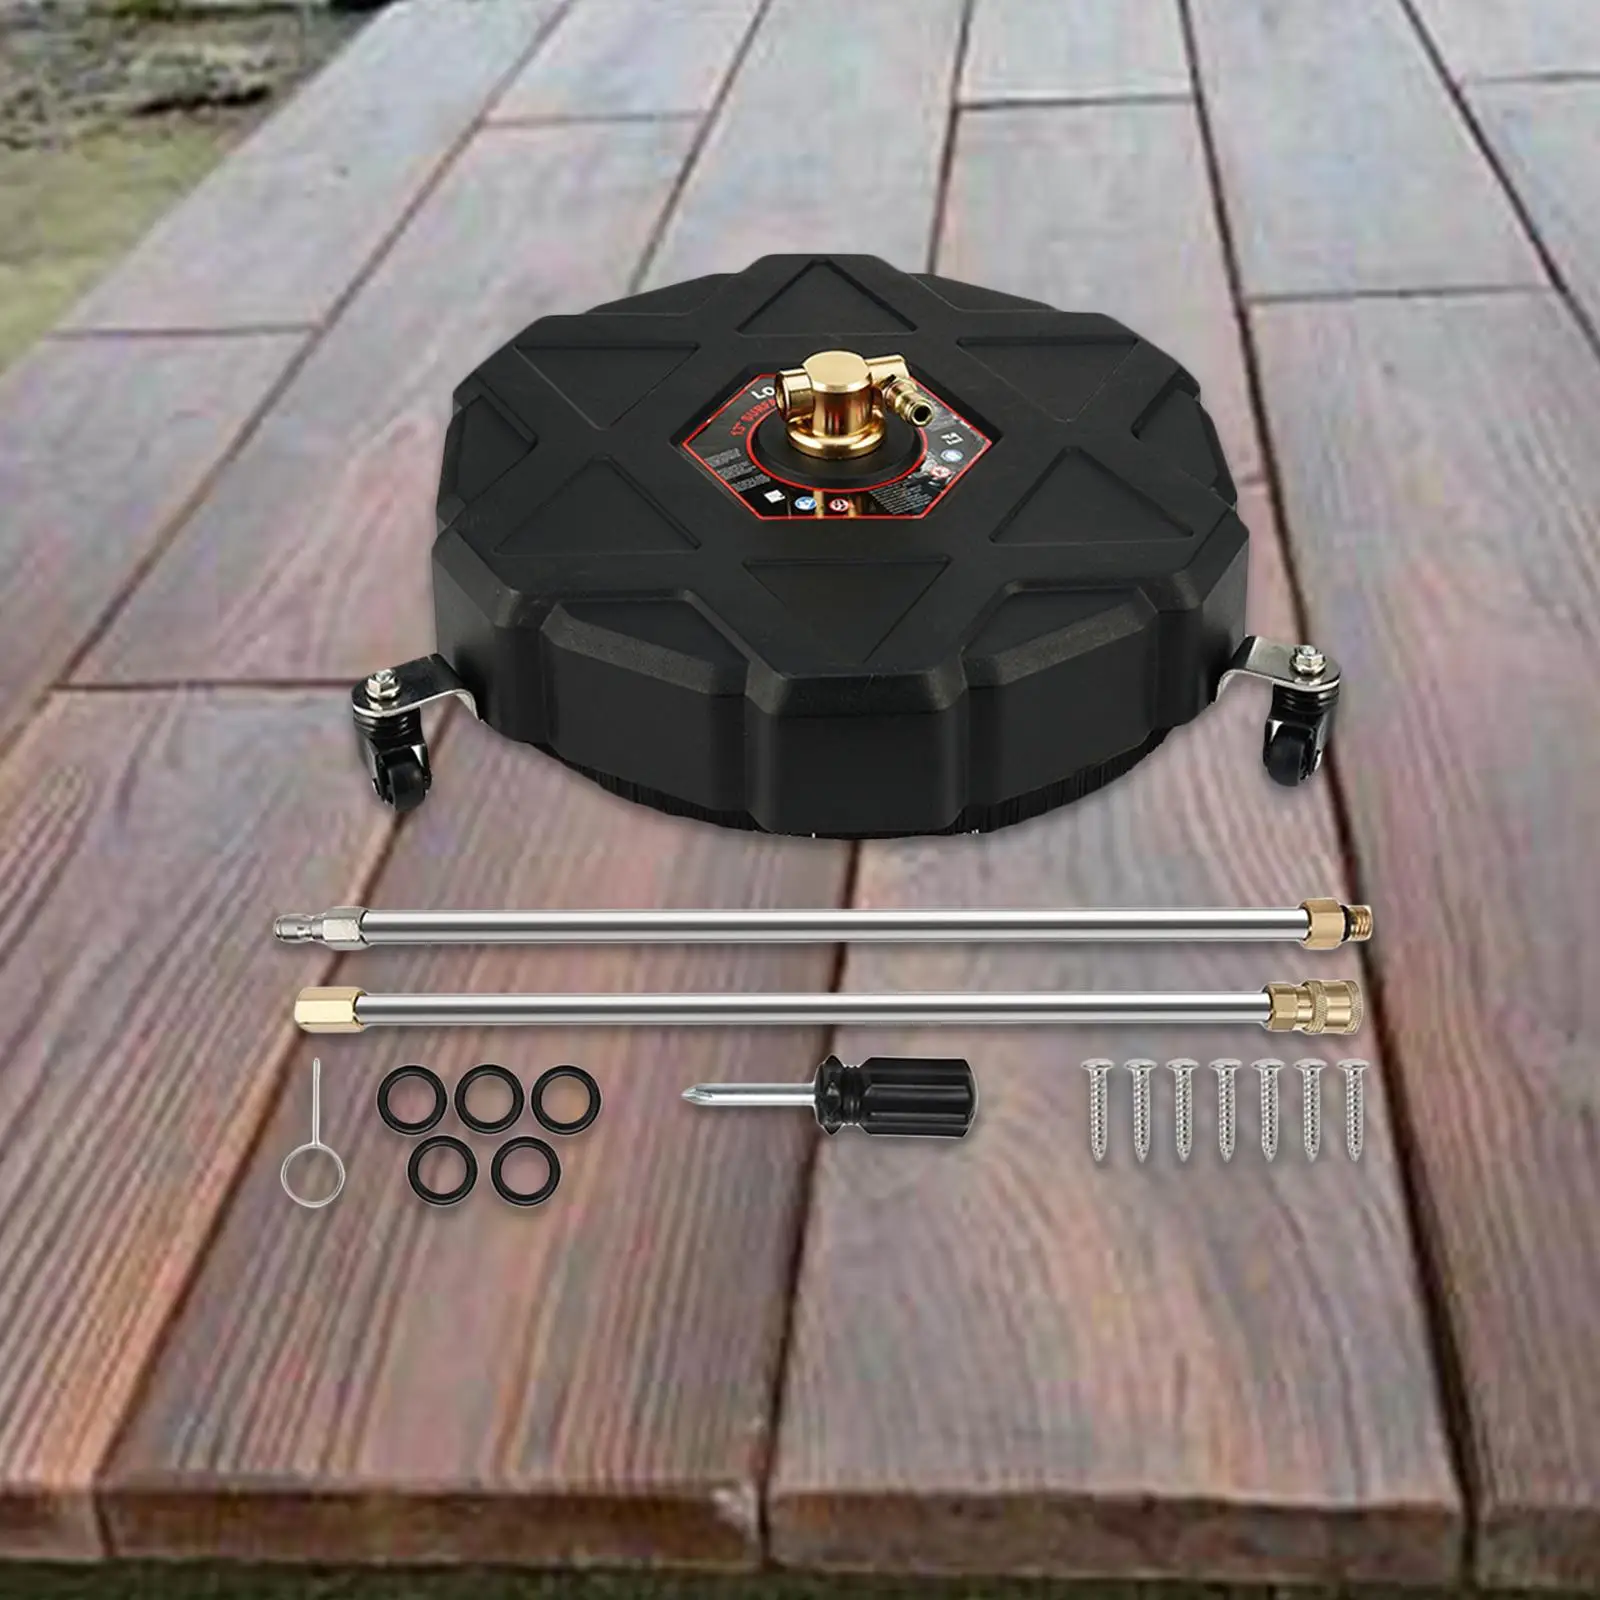 13inch Rotary Surface Cleaner 2500 PSI Max Pressure with Wheels Replaceable Stainless Steel Surface Cleaner for Patio Driveway